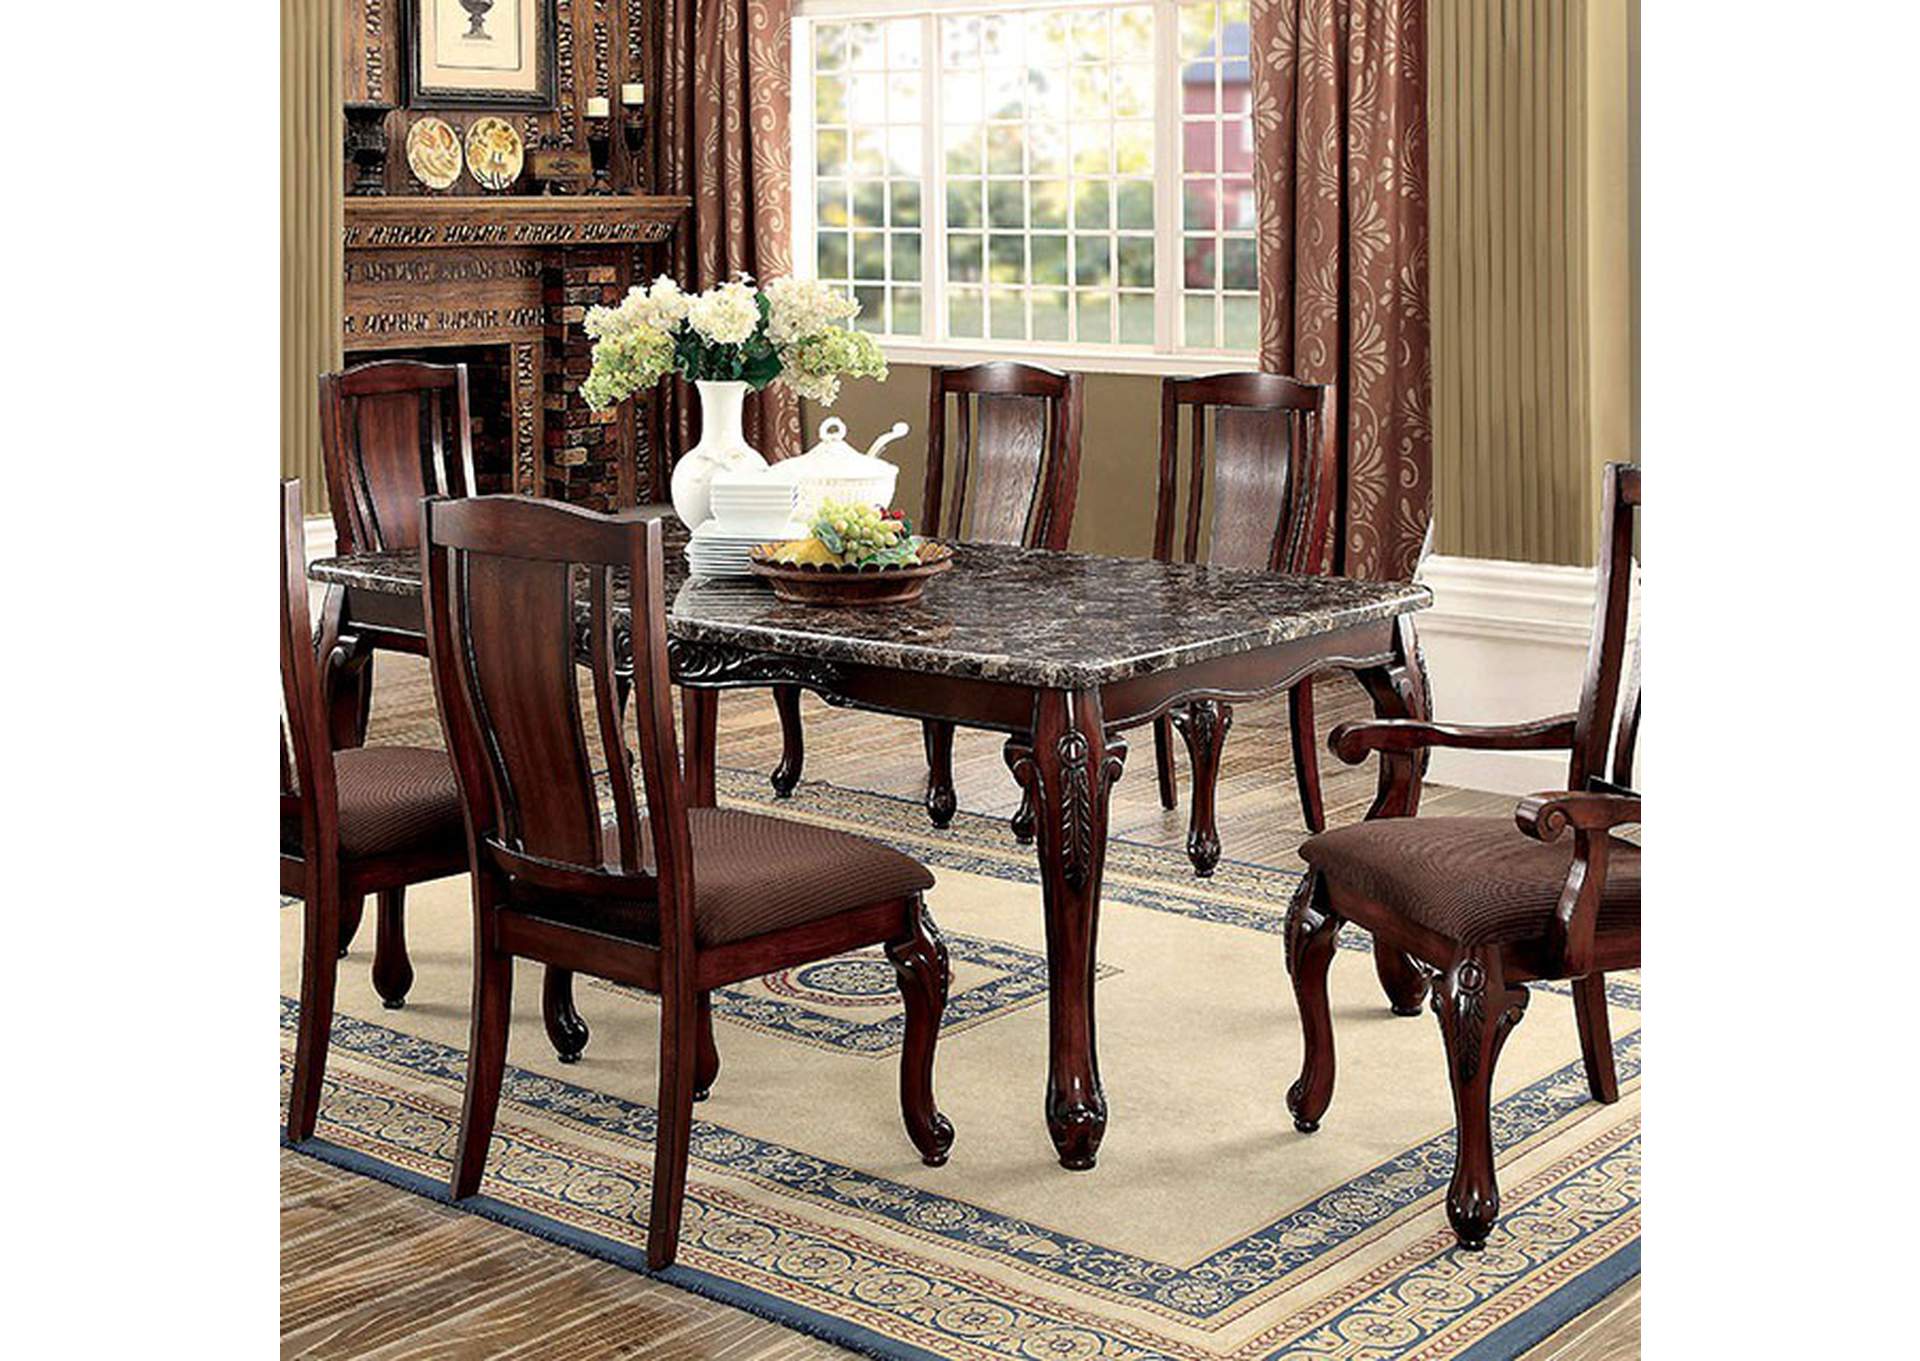 Johannesburg Brown Cherry Dining Table,Furniture of America